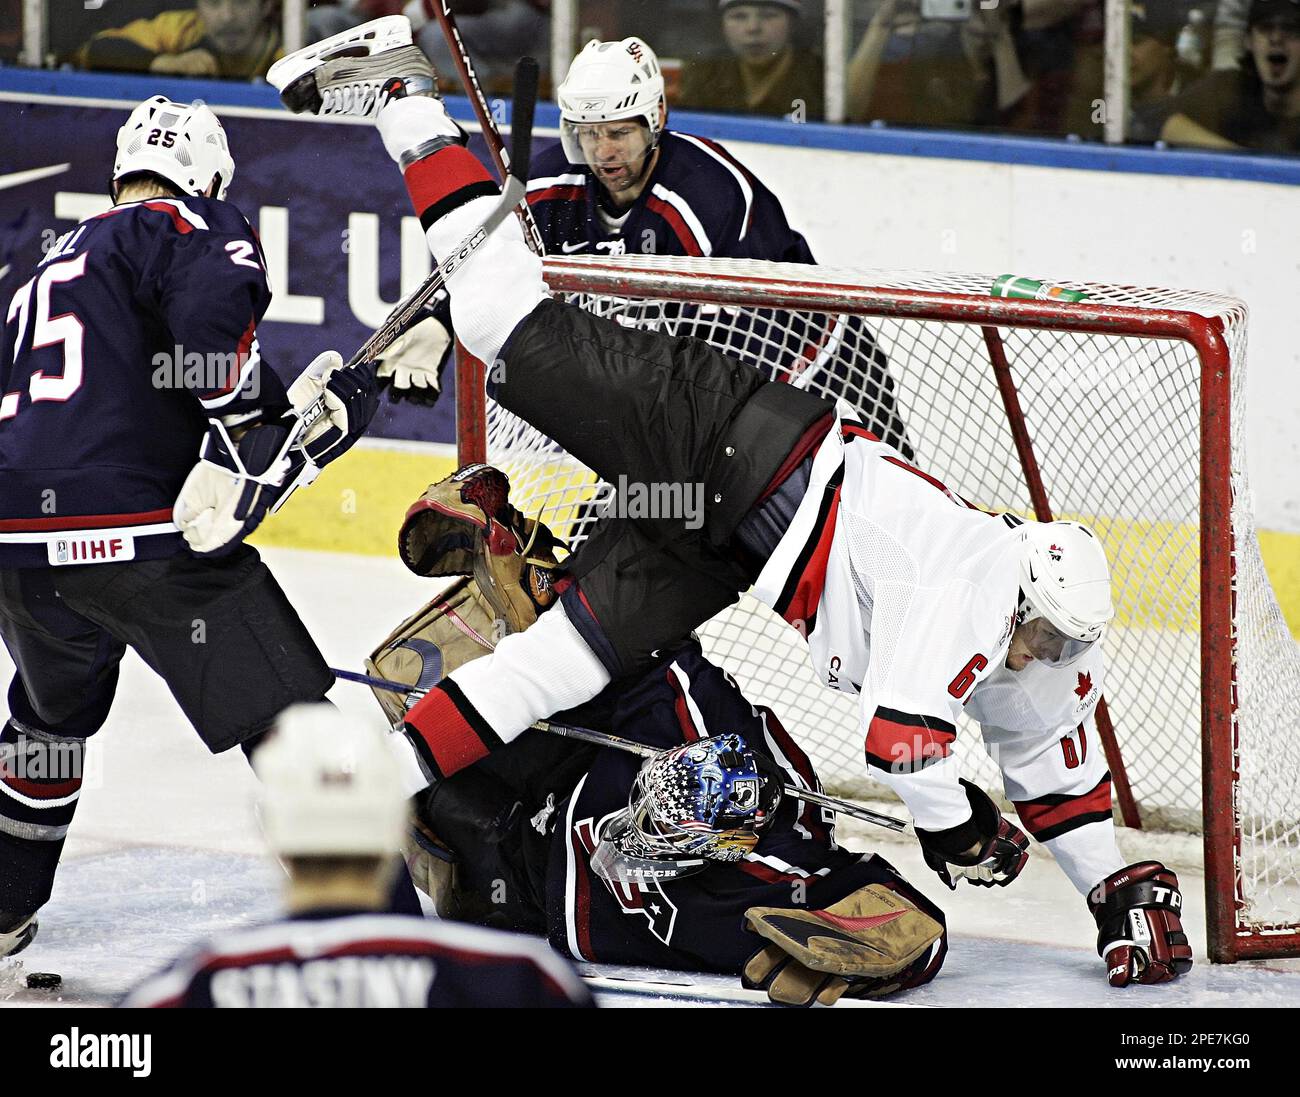 Team Canada Rick Nash flips over USA's goalie Rick DiPietro during third  period of an exhibition game in Friday, April 22, 2005 at the Quebec  Colisee in preparation for the world championship